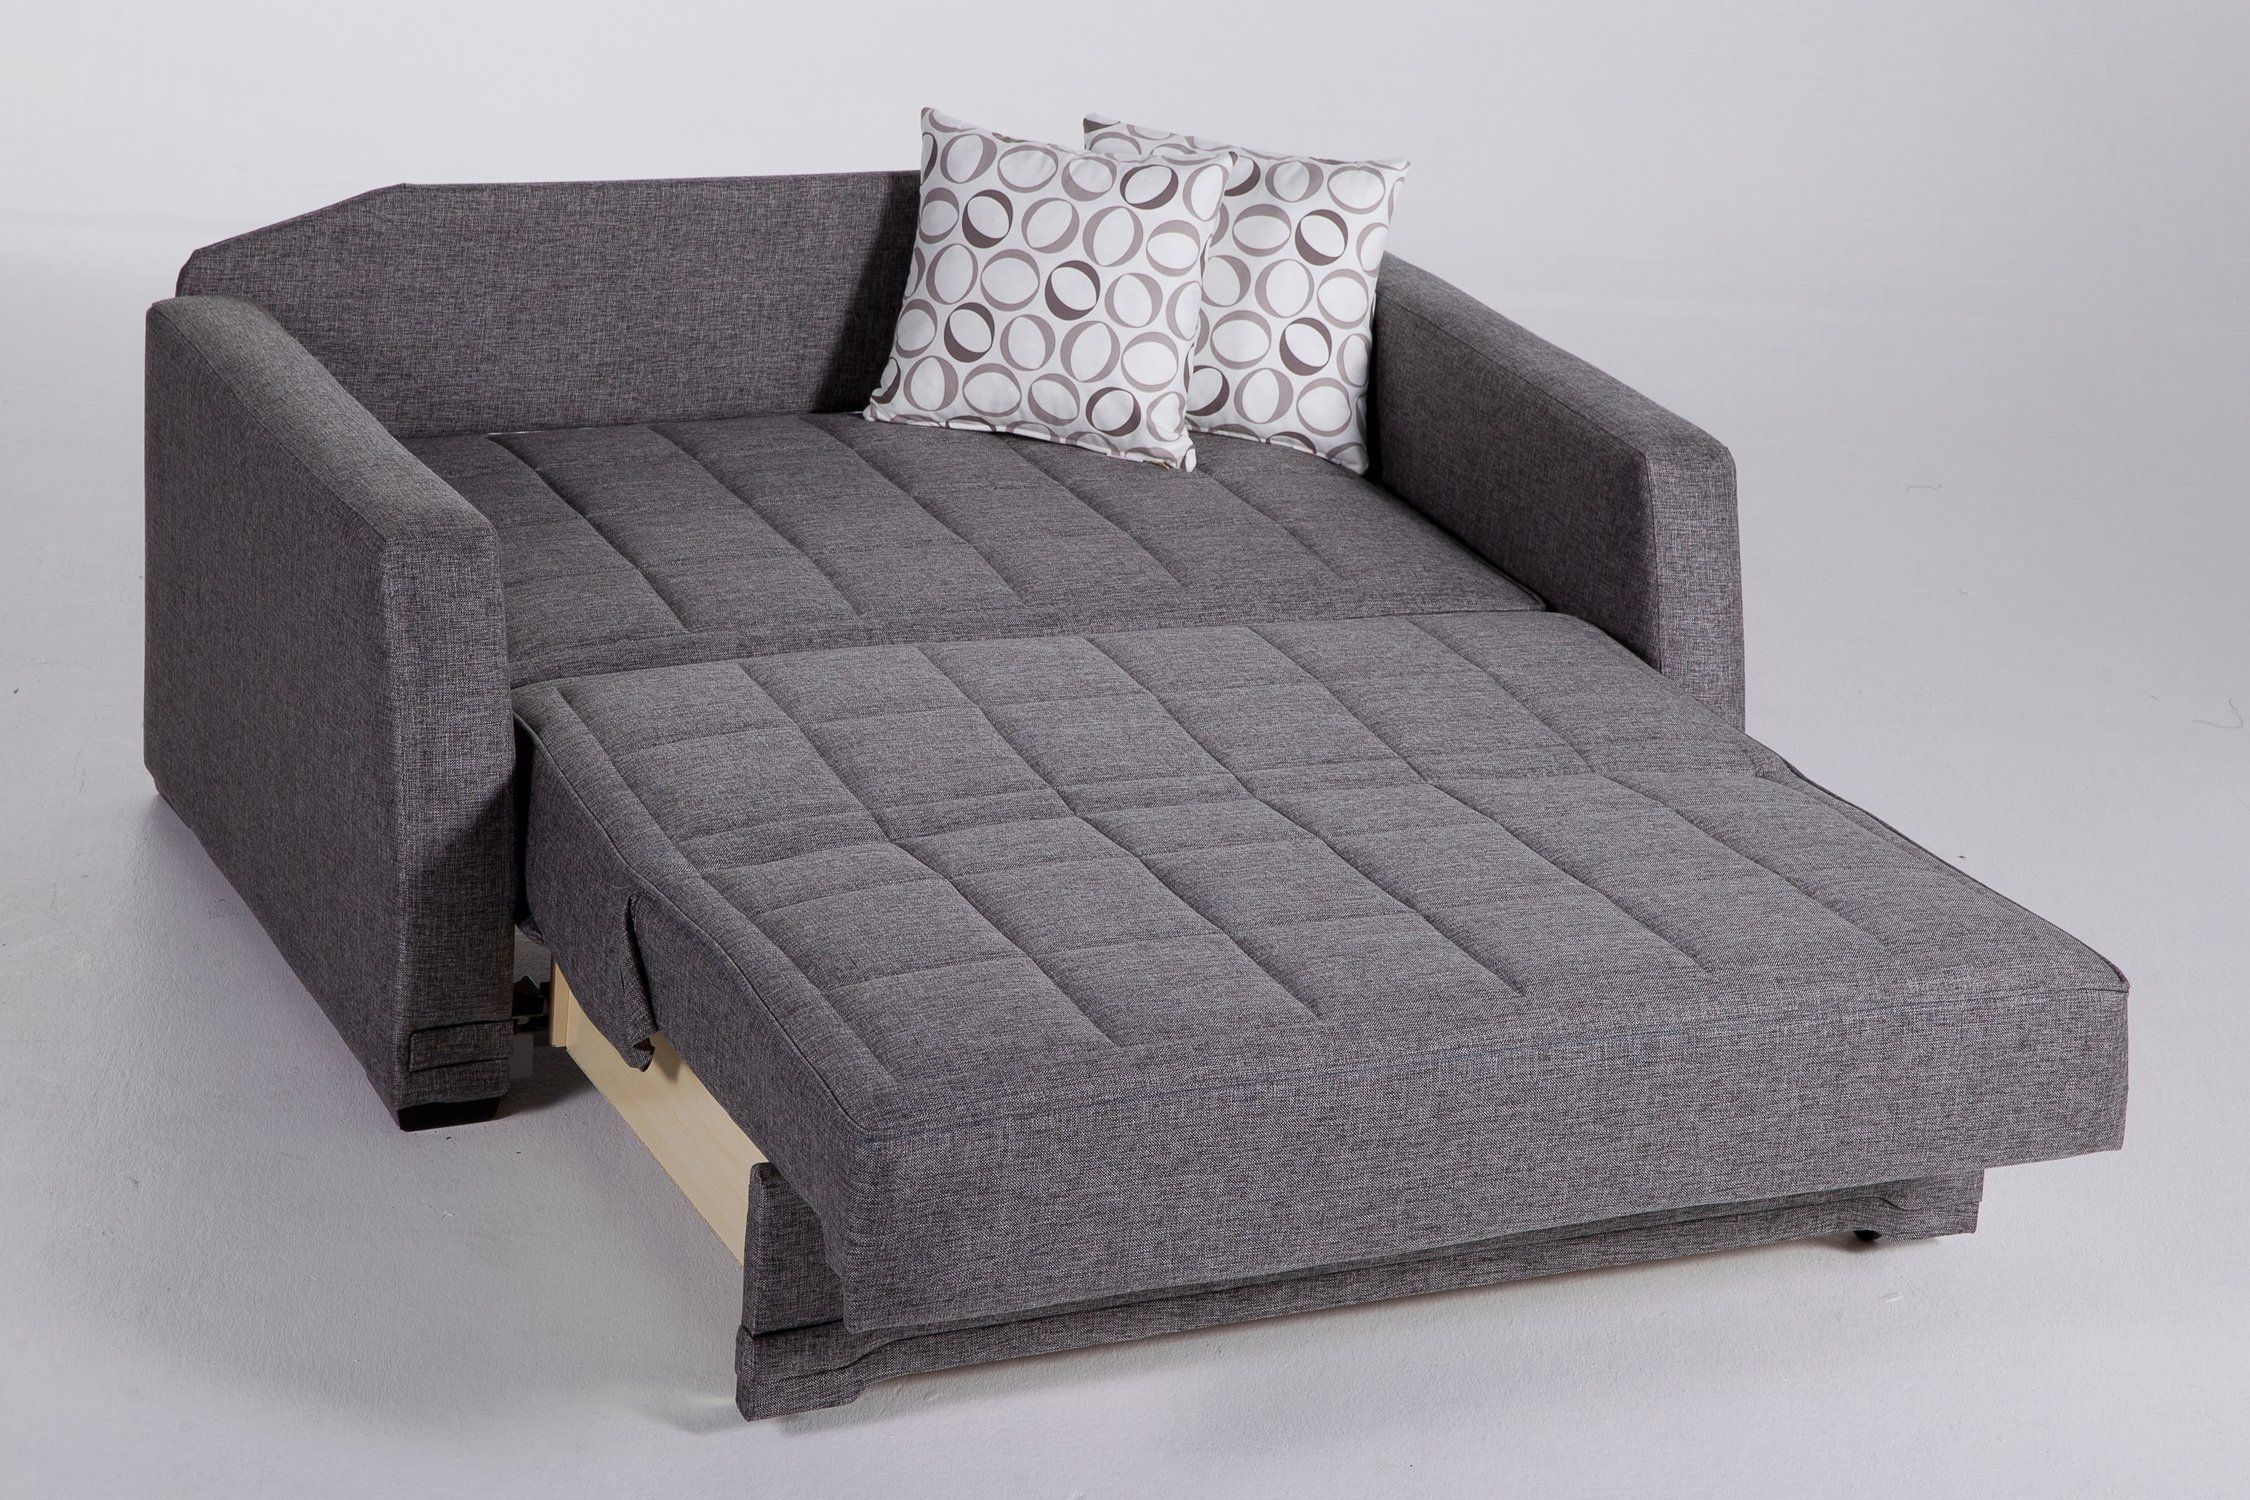 Valerie Diego Gray Loveseat Sleeperistikbal Furniture Inside Twin Nancy Sectional Sofa Beds With Storage (Photo 14 of 15)